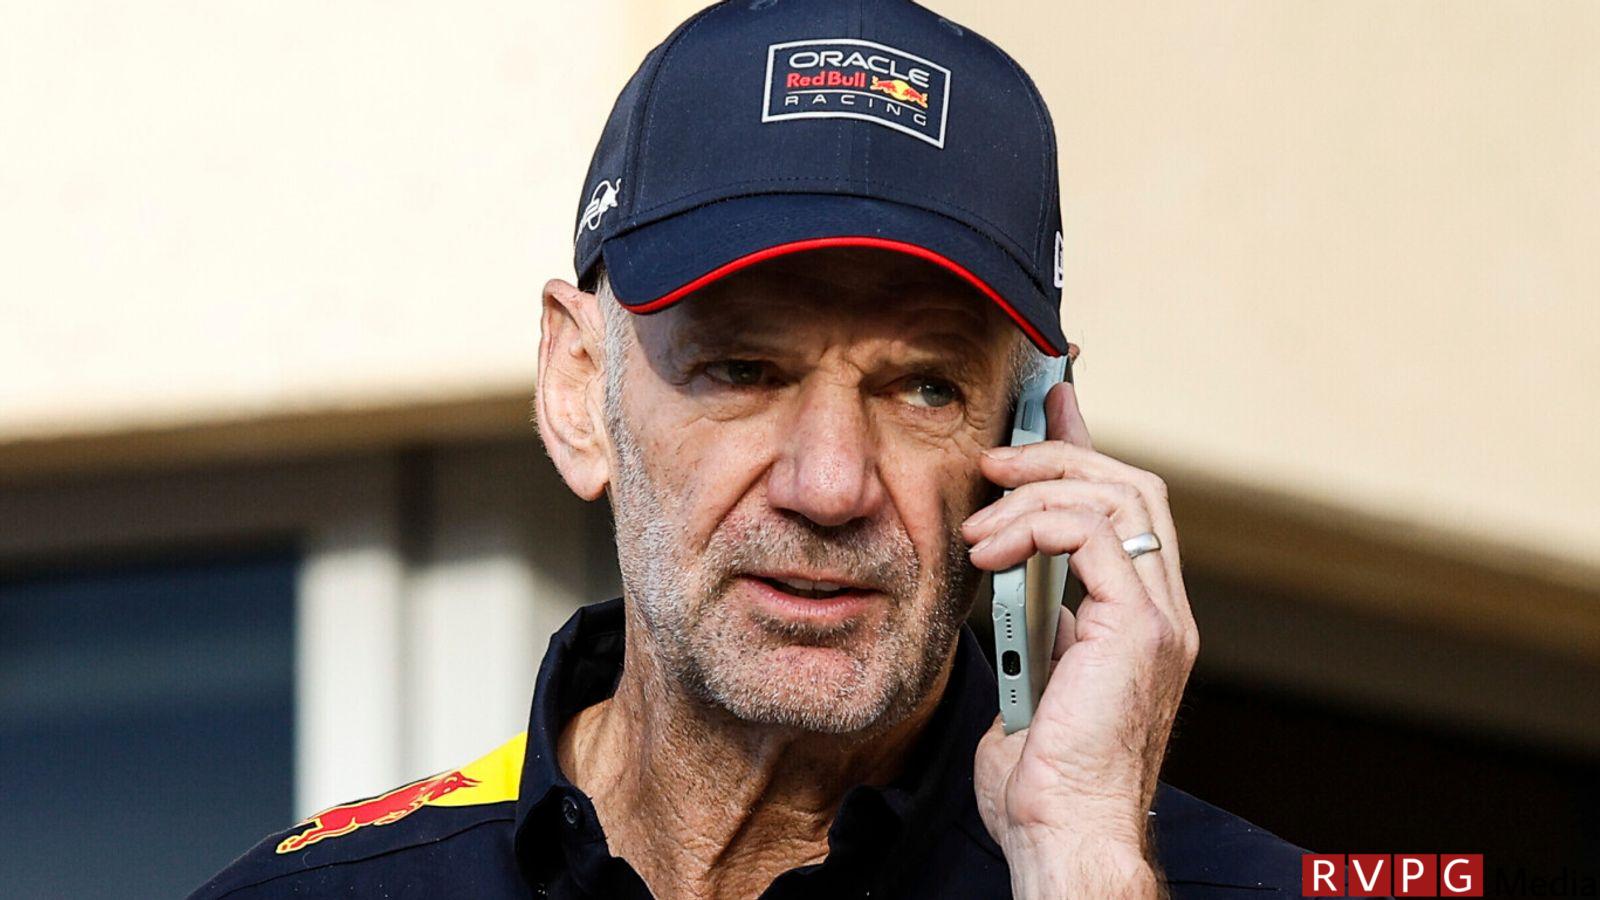 Adrian Newey will be at the Miami GP as Red Bull exit negotiations continue following the decision to leave the world champion